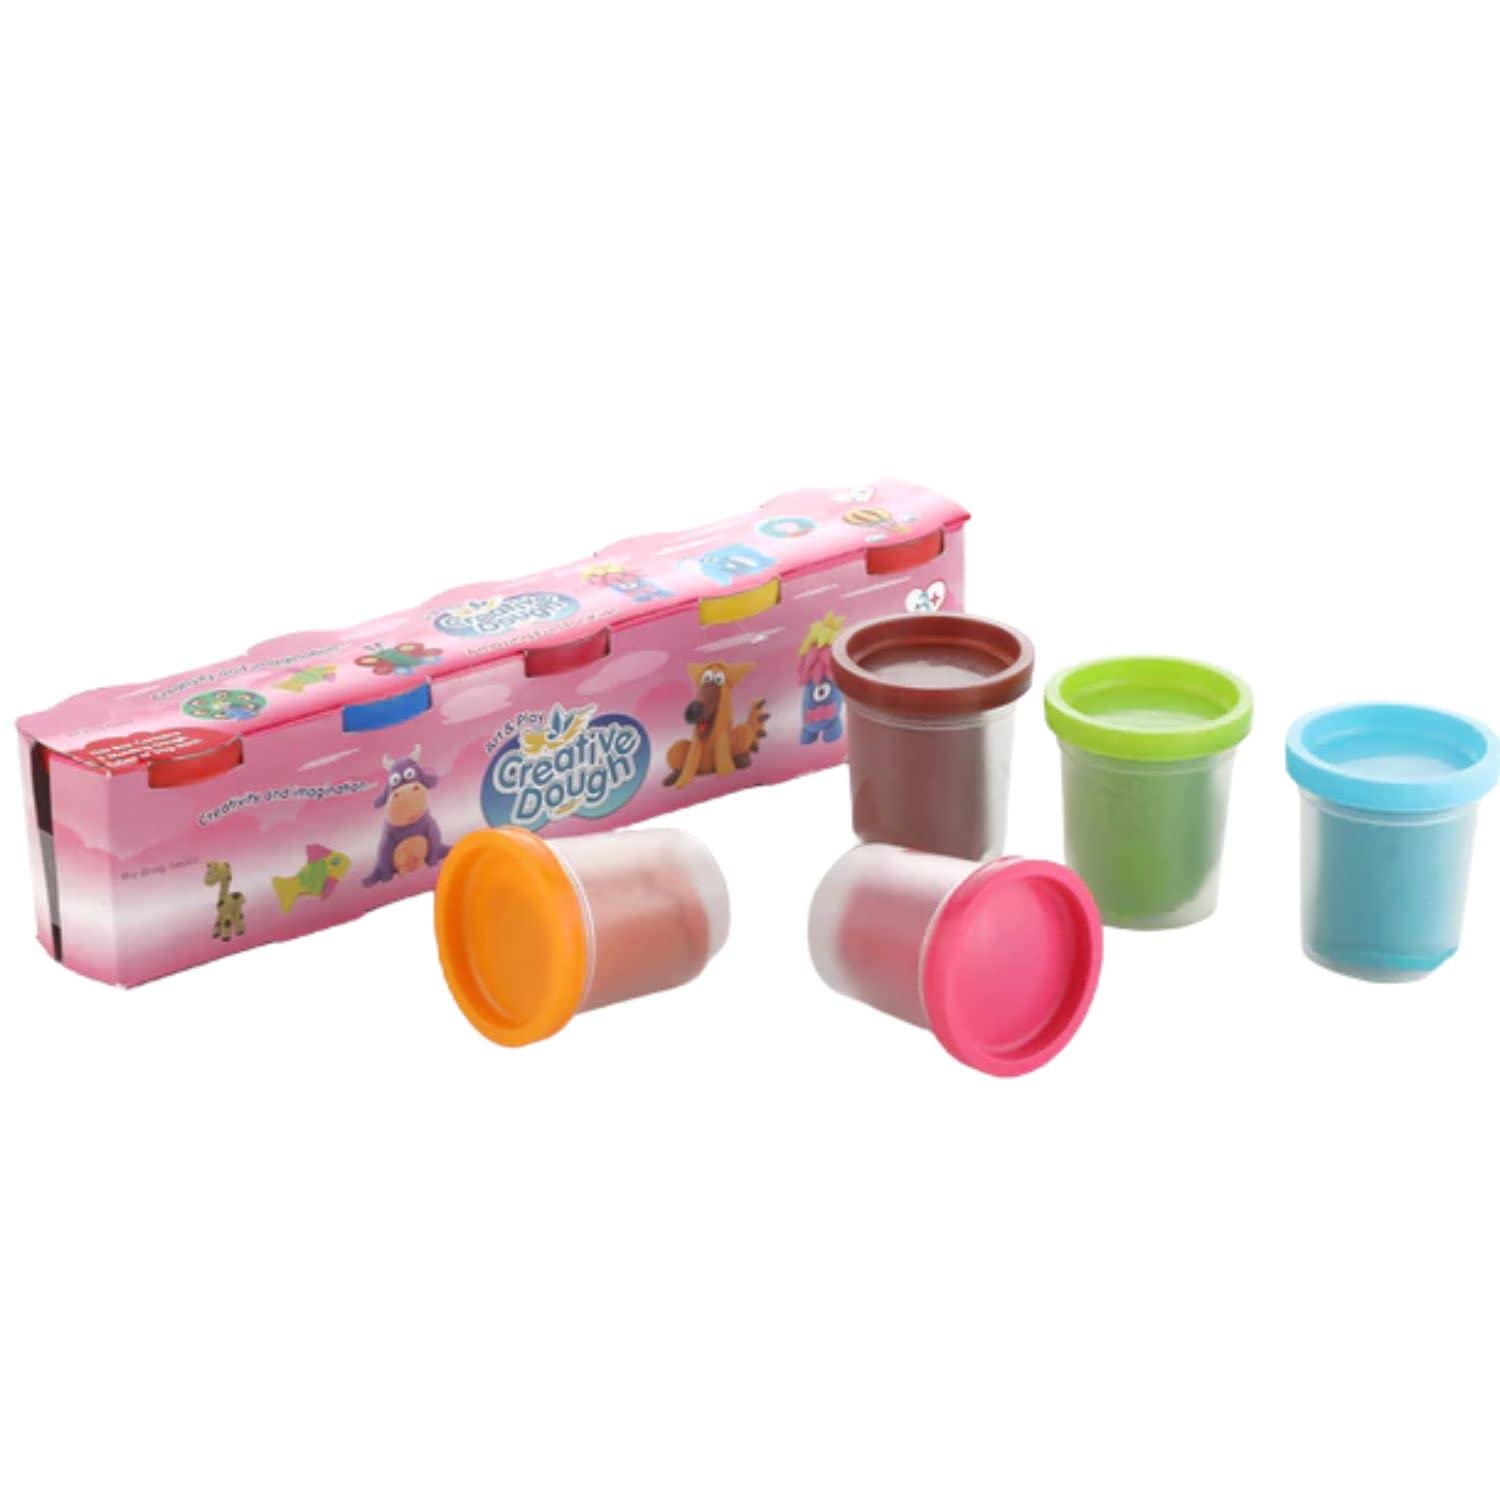 Kids Mandi dough compound case of colors non-toxic assorted ages 2 and up multicolor.